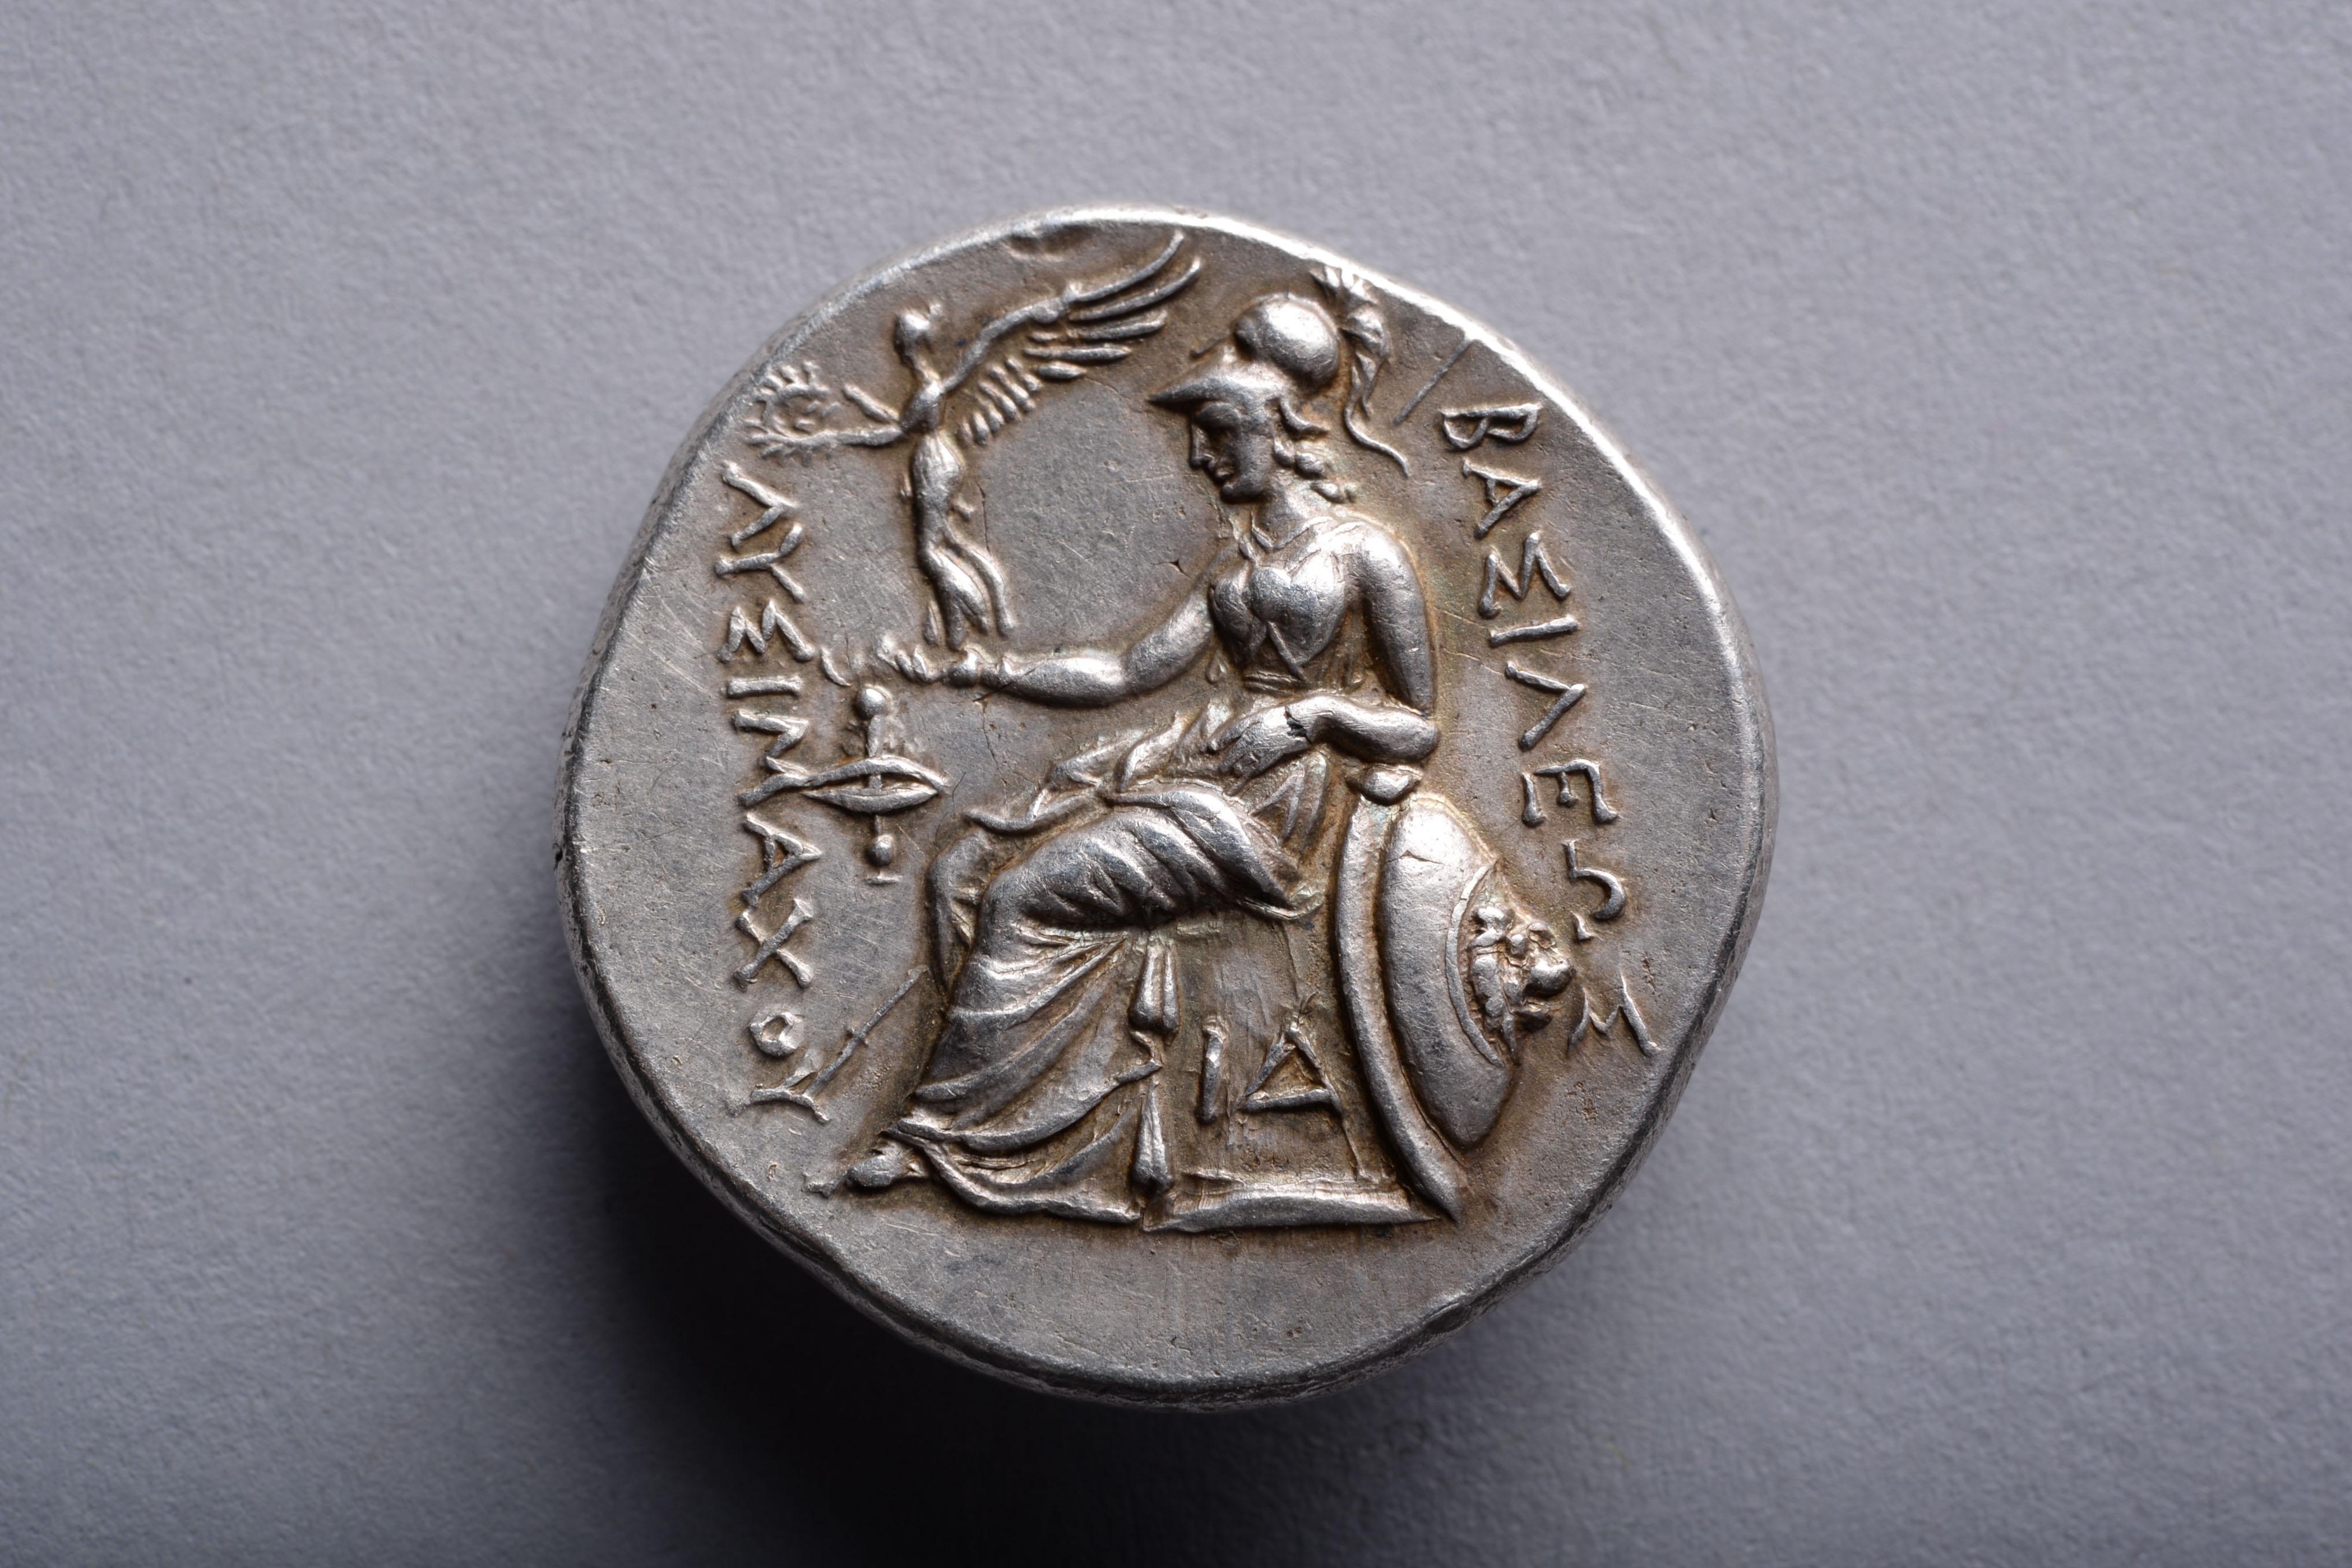 A beautiful, sculptural silver coin with the head of Alexander the Great, minted under one of Alexander's top generals and successors, King Lysimachos. Struck at the Lysimacheia mint, circa 297-281 BC.

The obverse with the deified Alexander, his